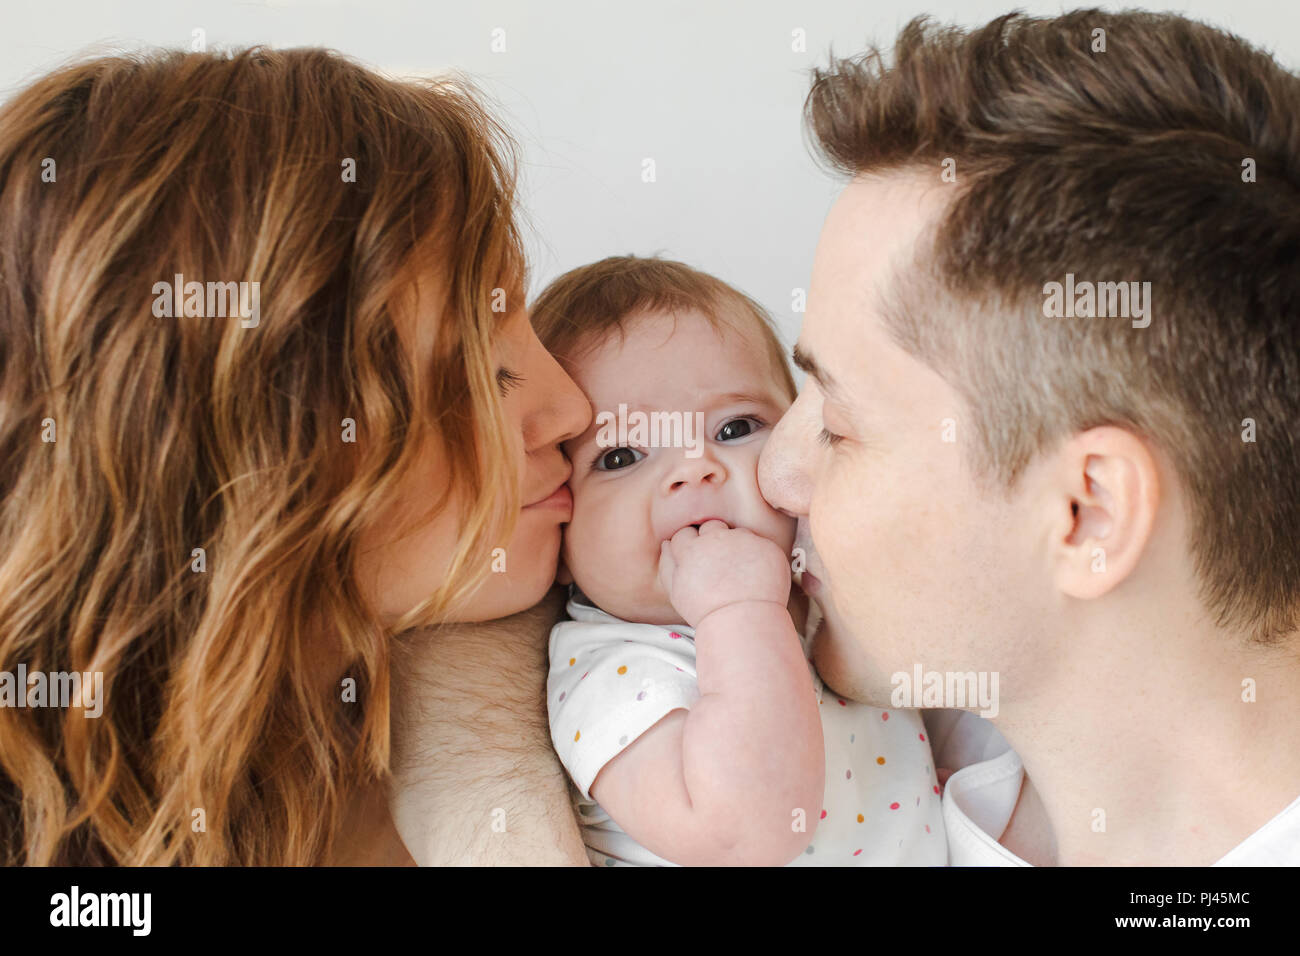 Parents kissing baby in cheeks Stock Photo